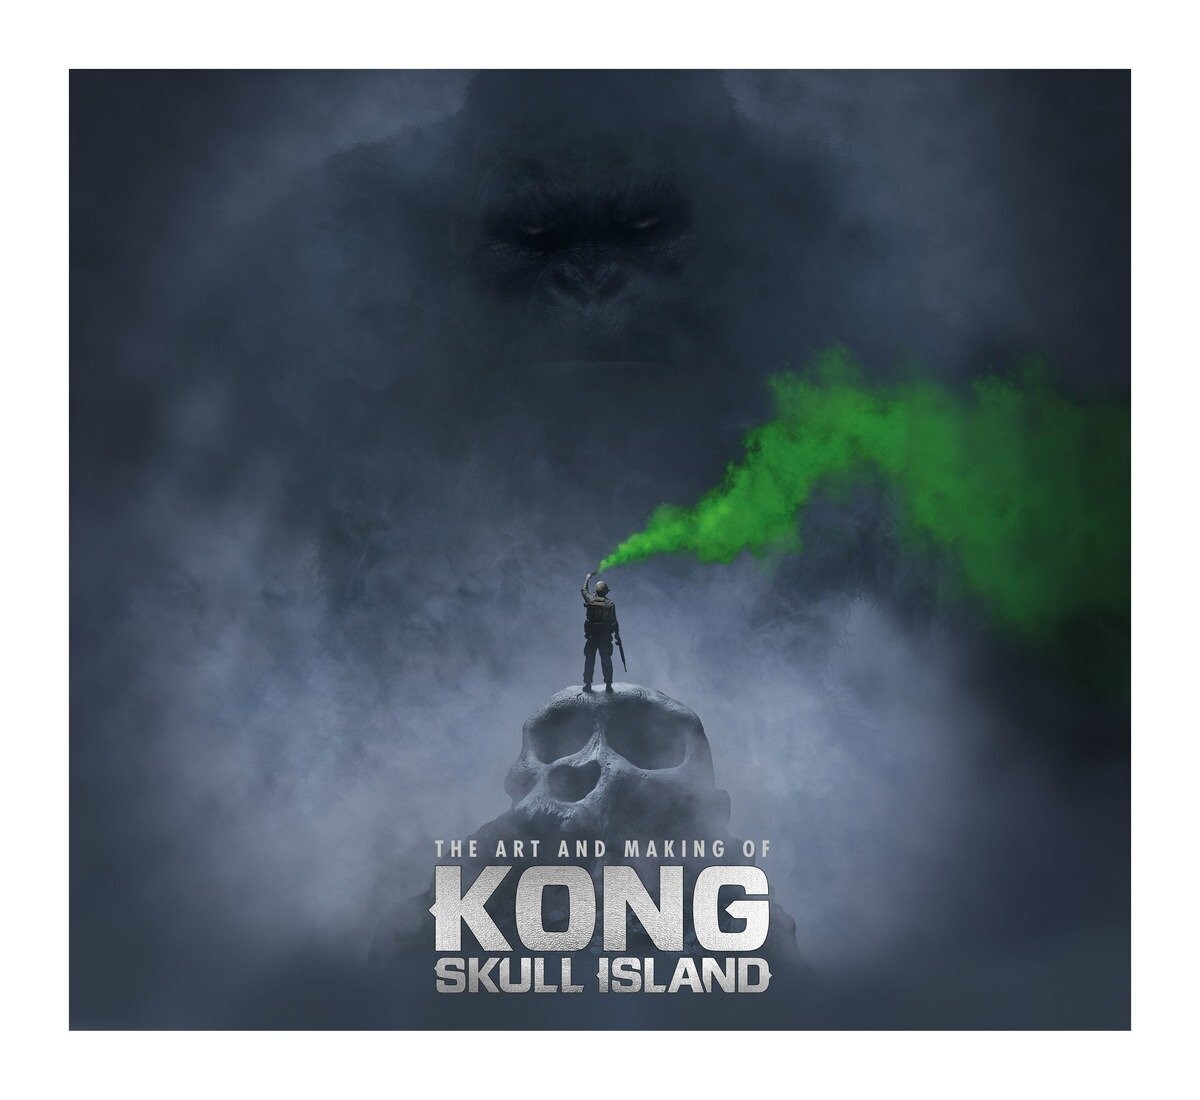 The Art and Making of Kong: Skull Island (Hardcover)